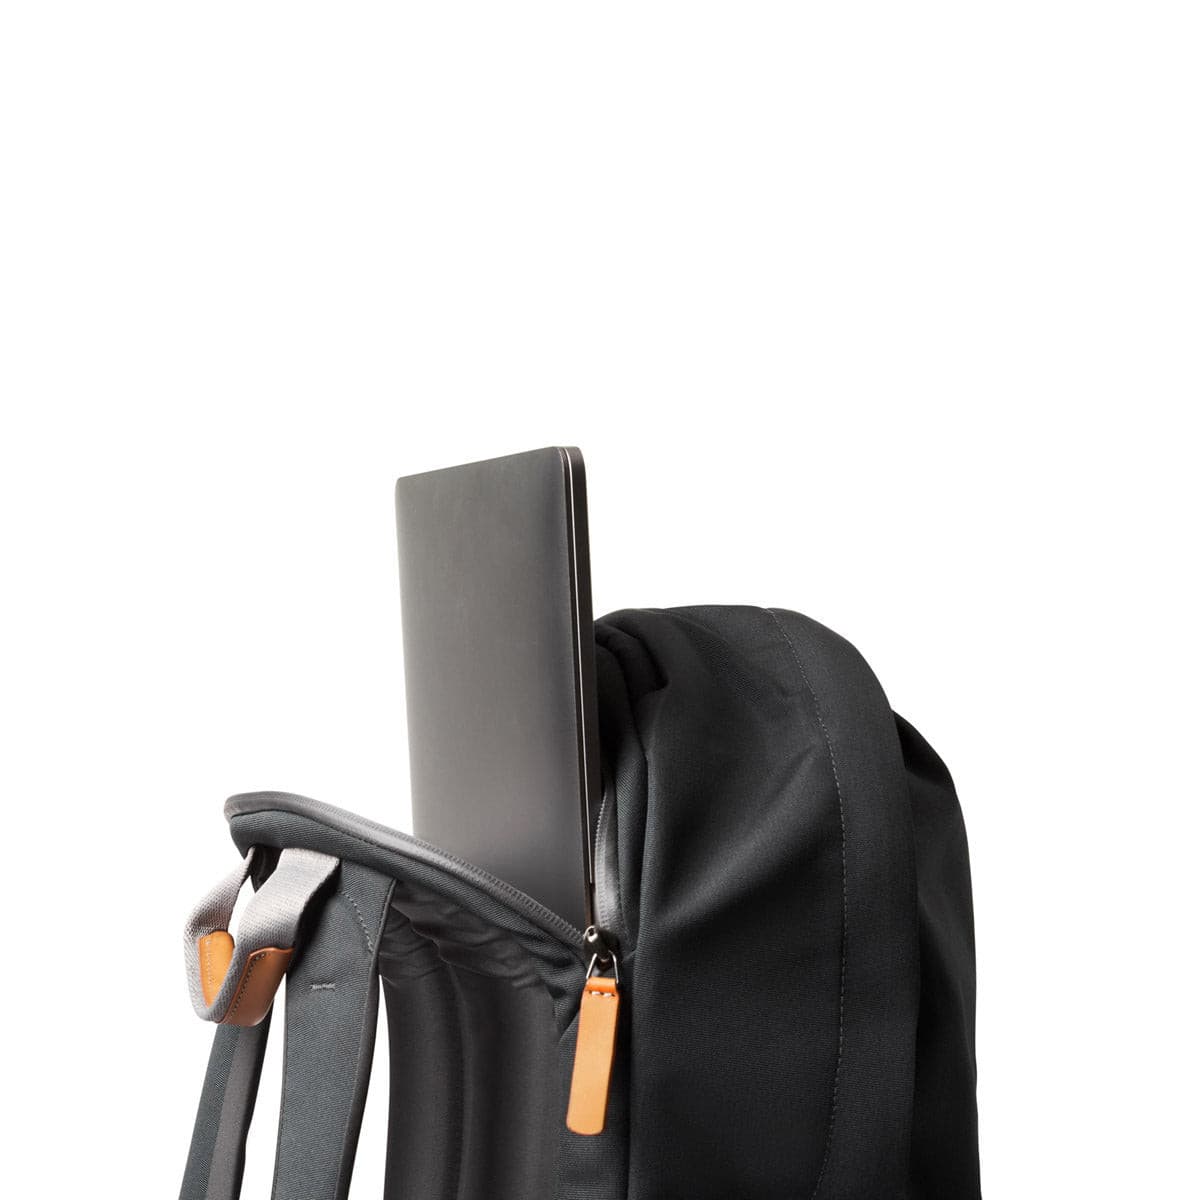 Classic Backpack Plus ( Second Edition ) Bellroy Backpack Suburban.